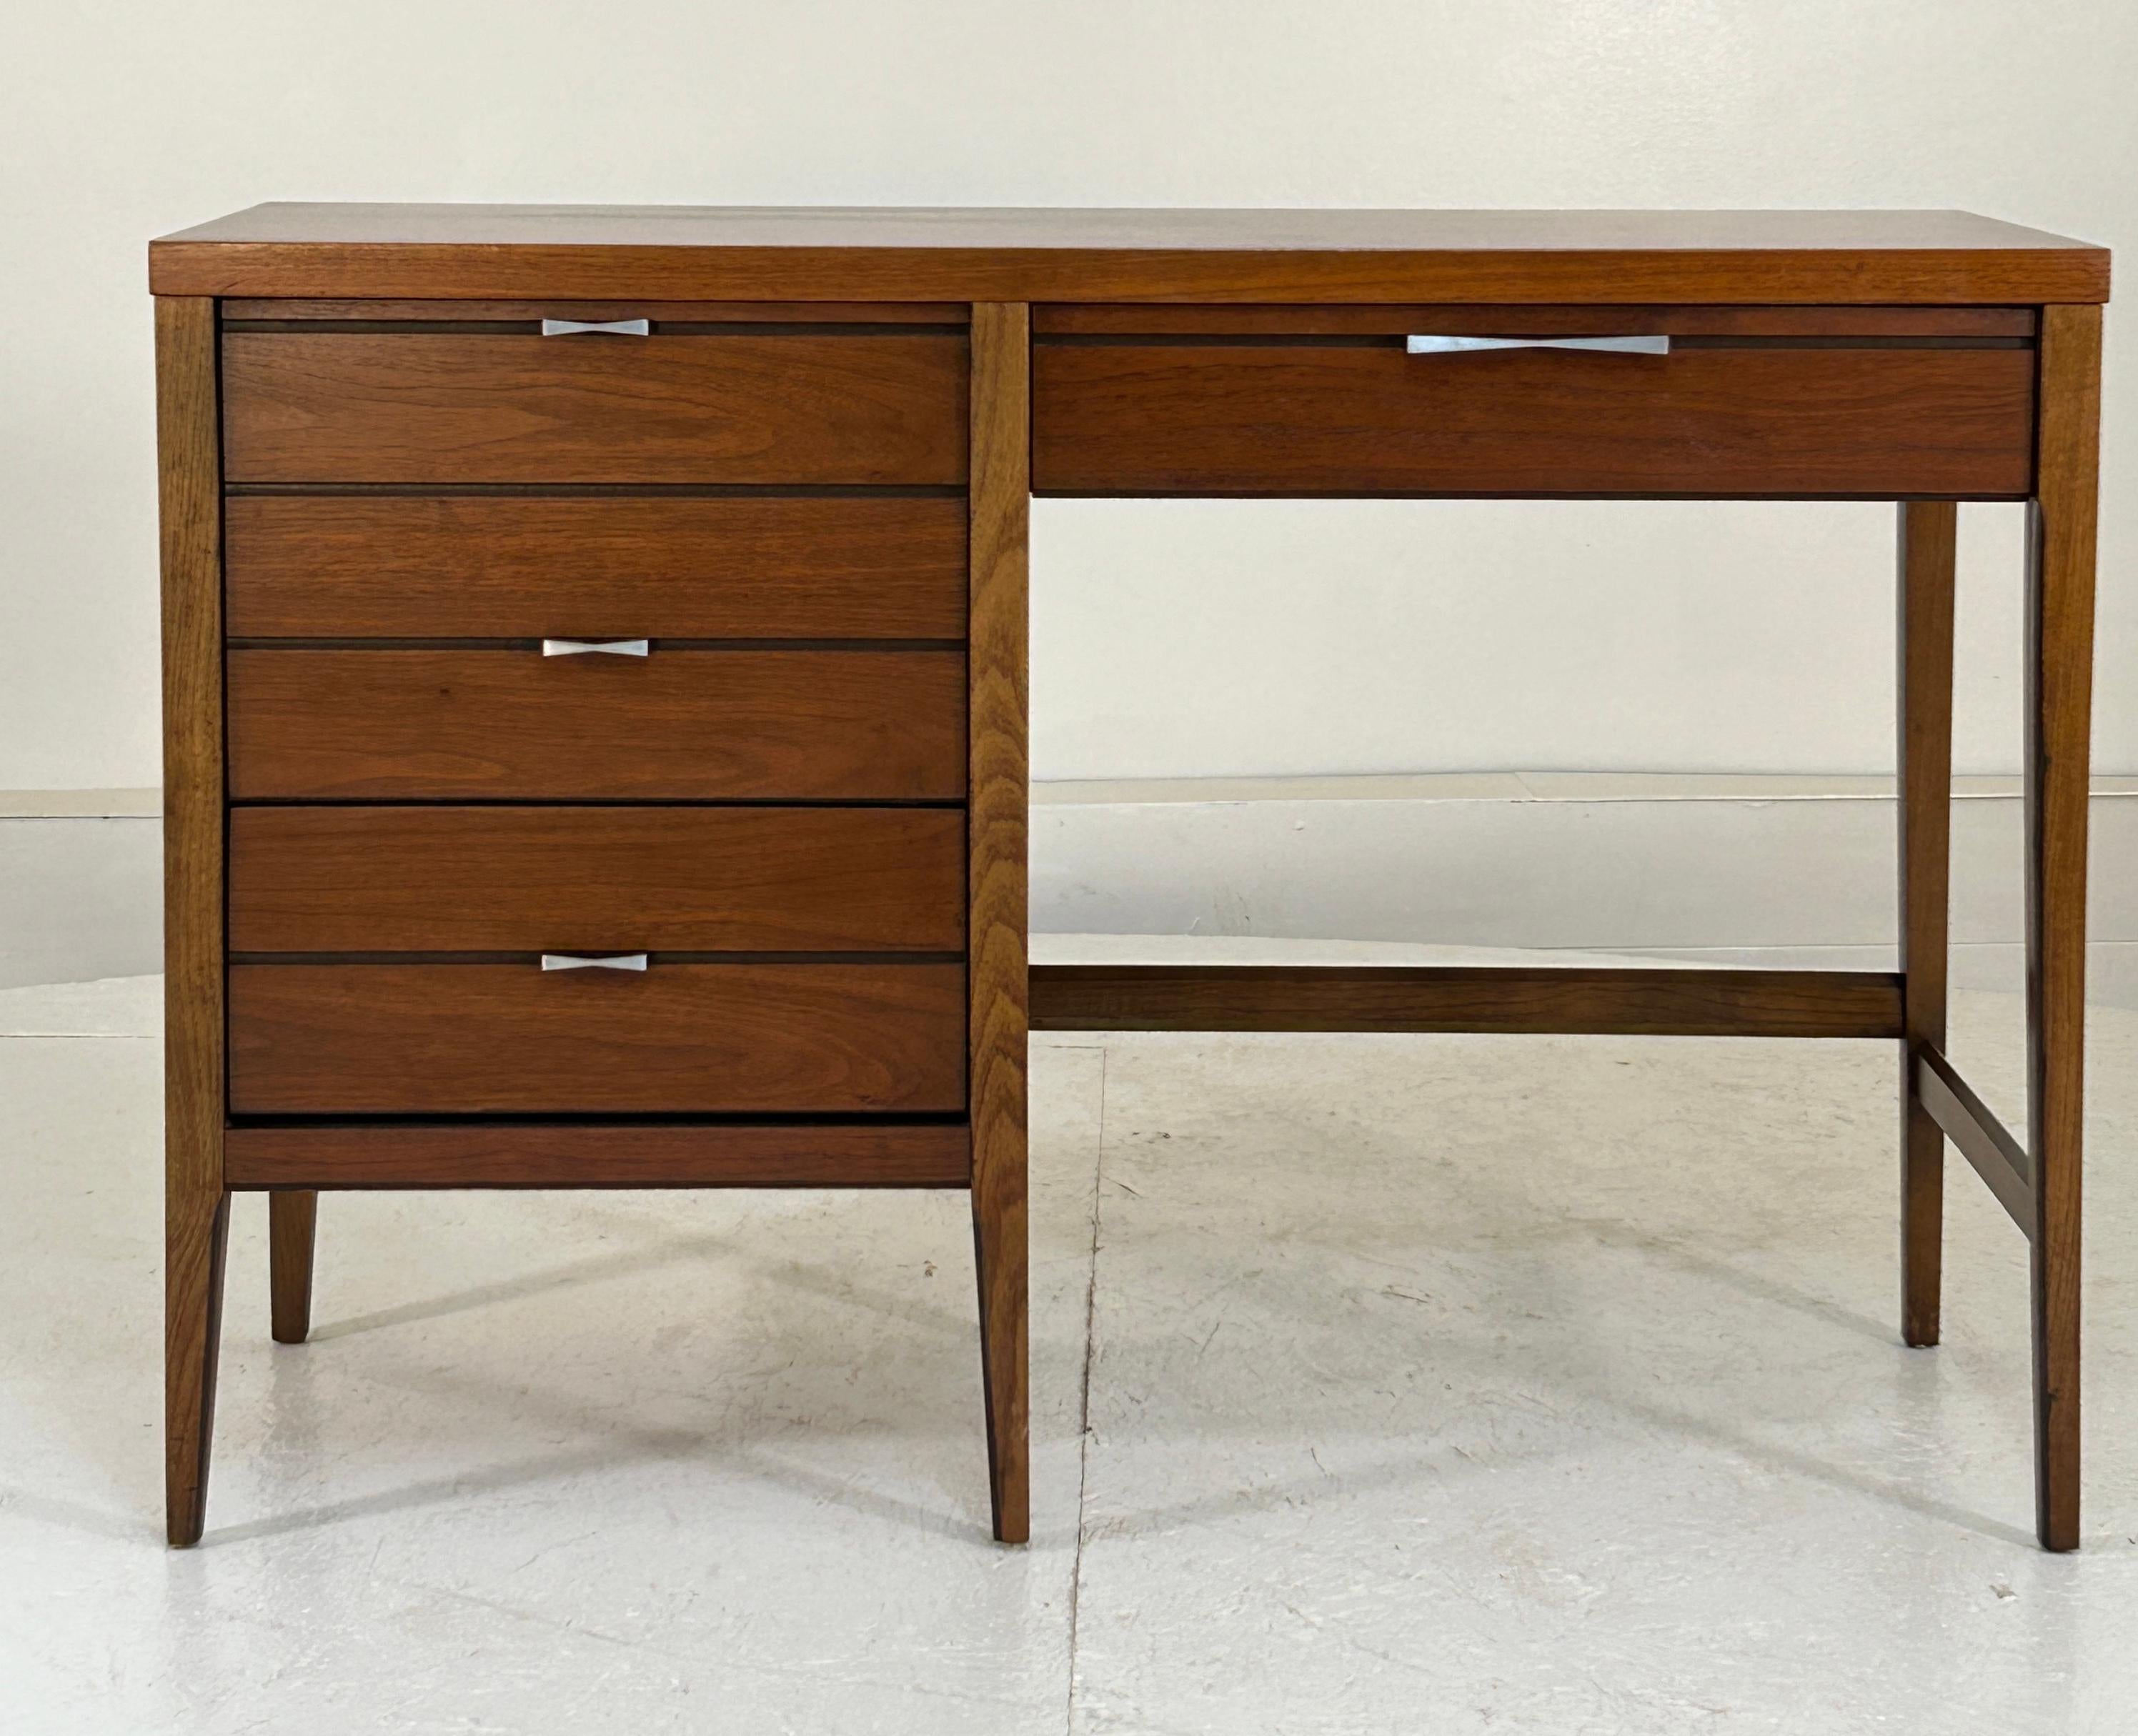 American Desk or Vanity by Lane, Tuxedo series with chair For Sale